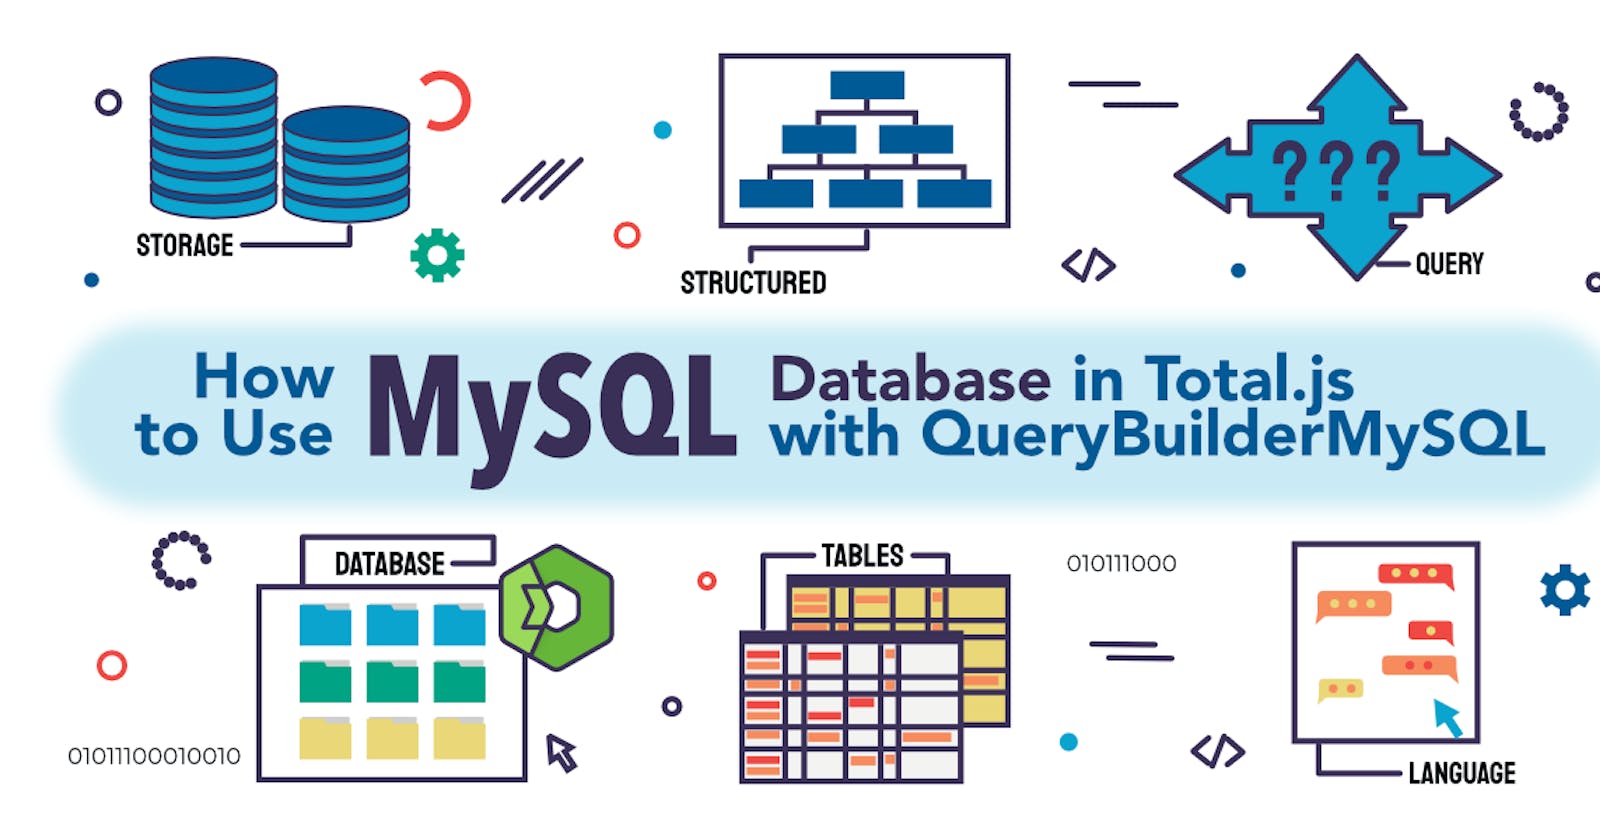 How to Use MySQL Database in Total.js with QueryBuilderMySQL?